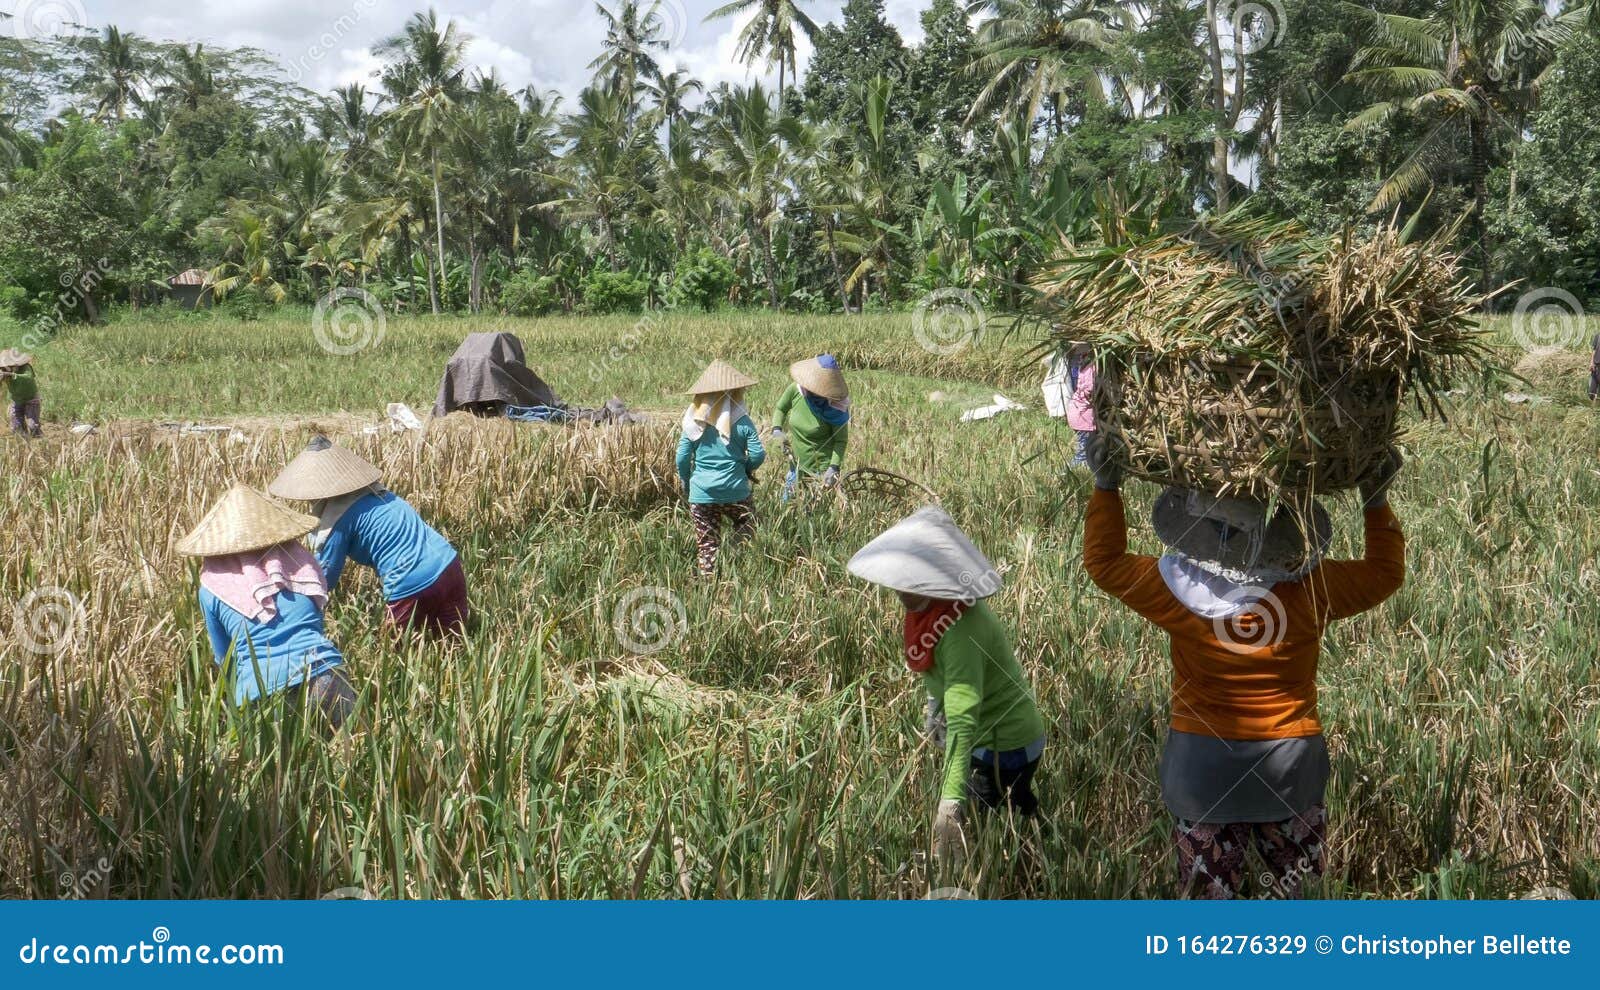 Ubud Indonesia March 15 2018 Wide Shot Of Women Harvesting Rice In A Paddy On Bali